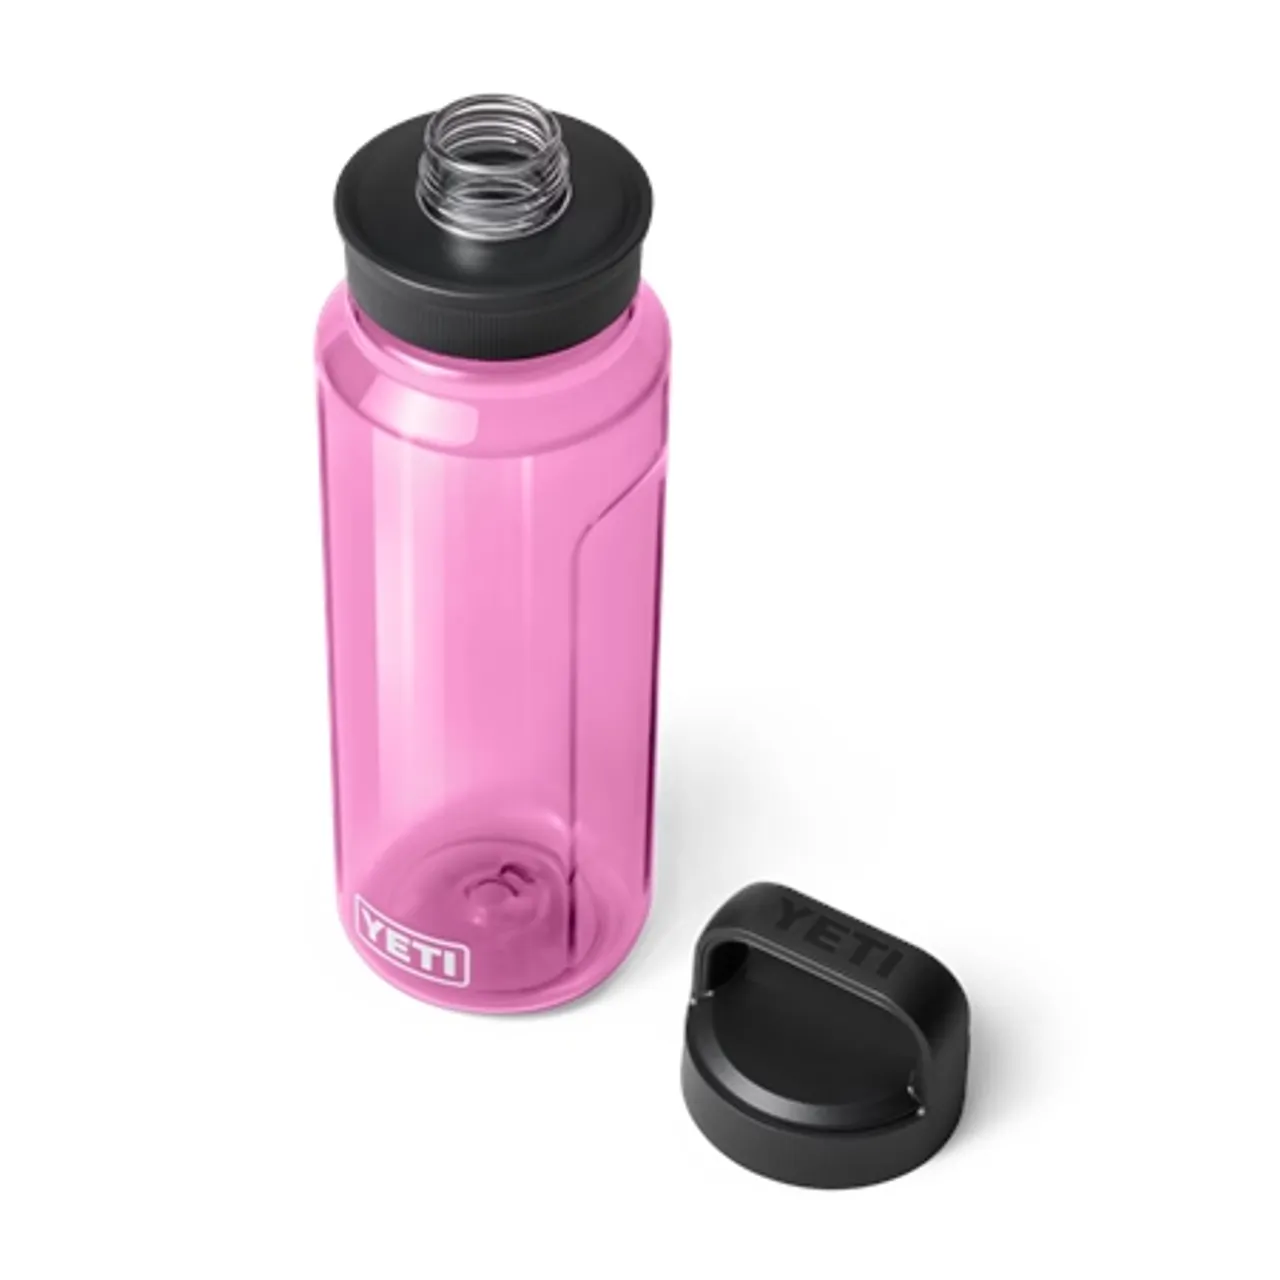 Yeti Yonder 1 Litre Water Bottle With Tether Cap - Power Pink - O/S